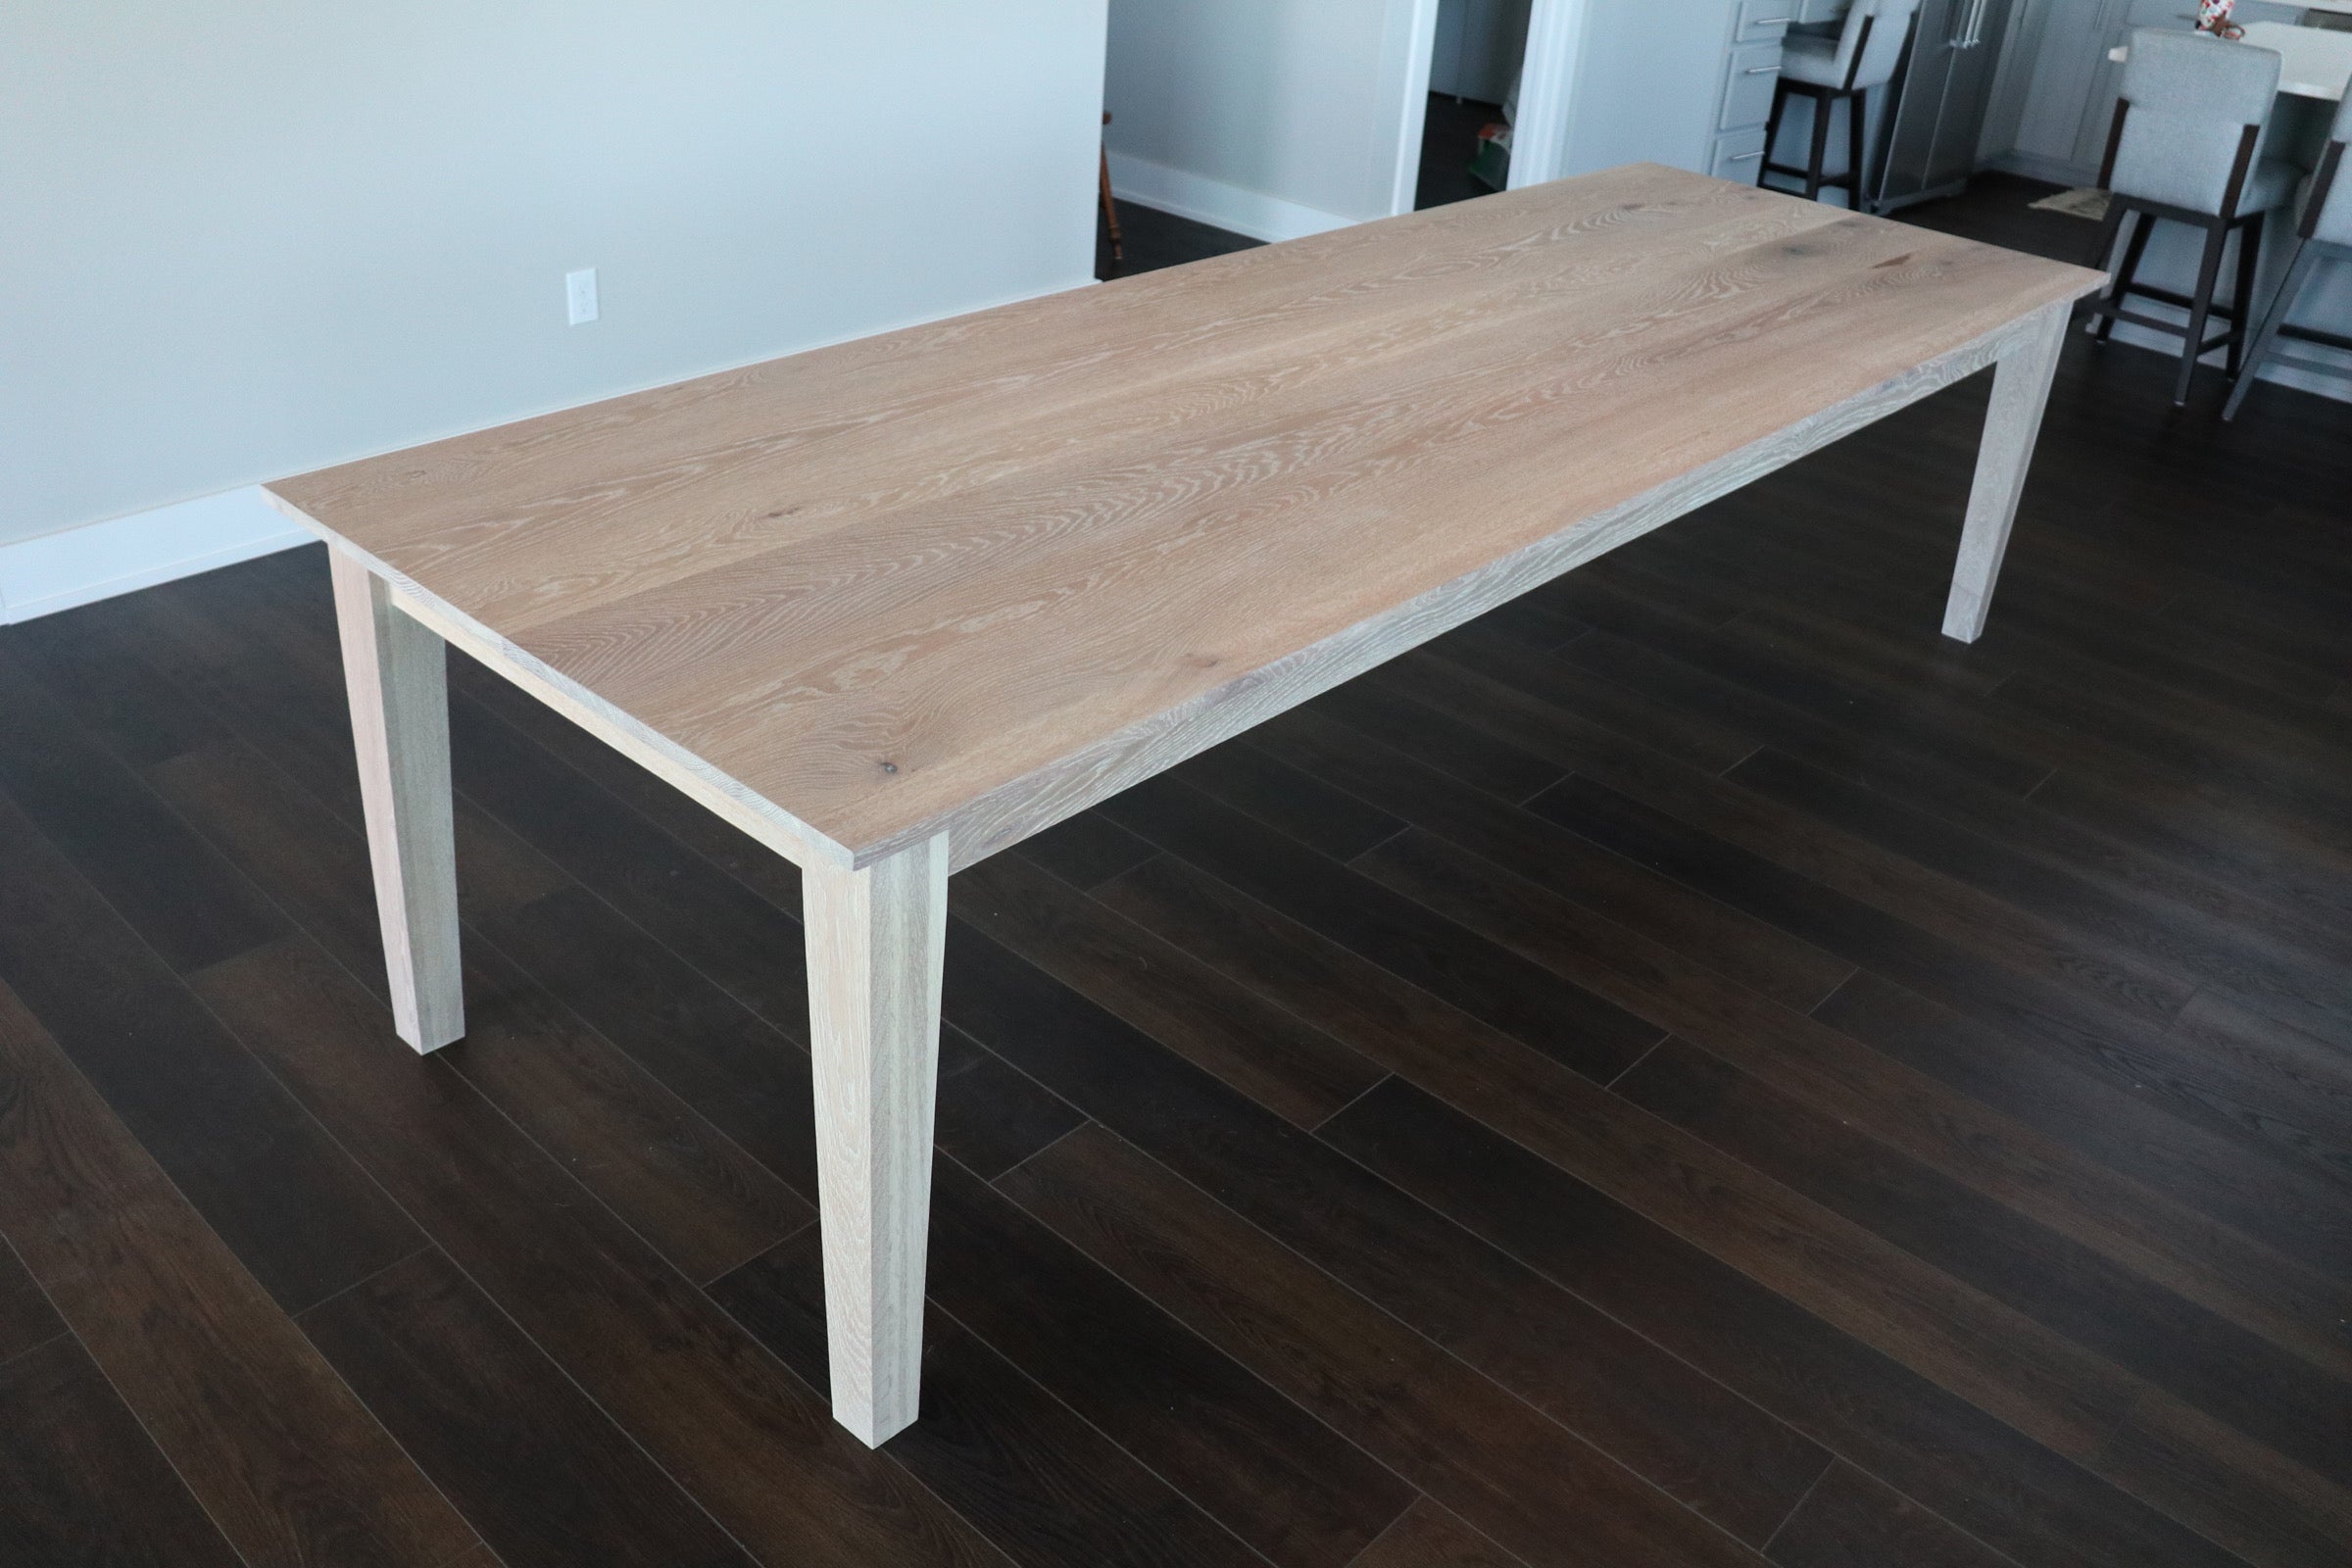 Solid White Oak Shaker Style Dining Table